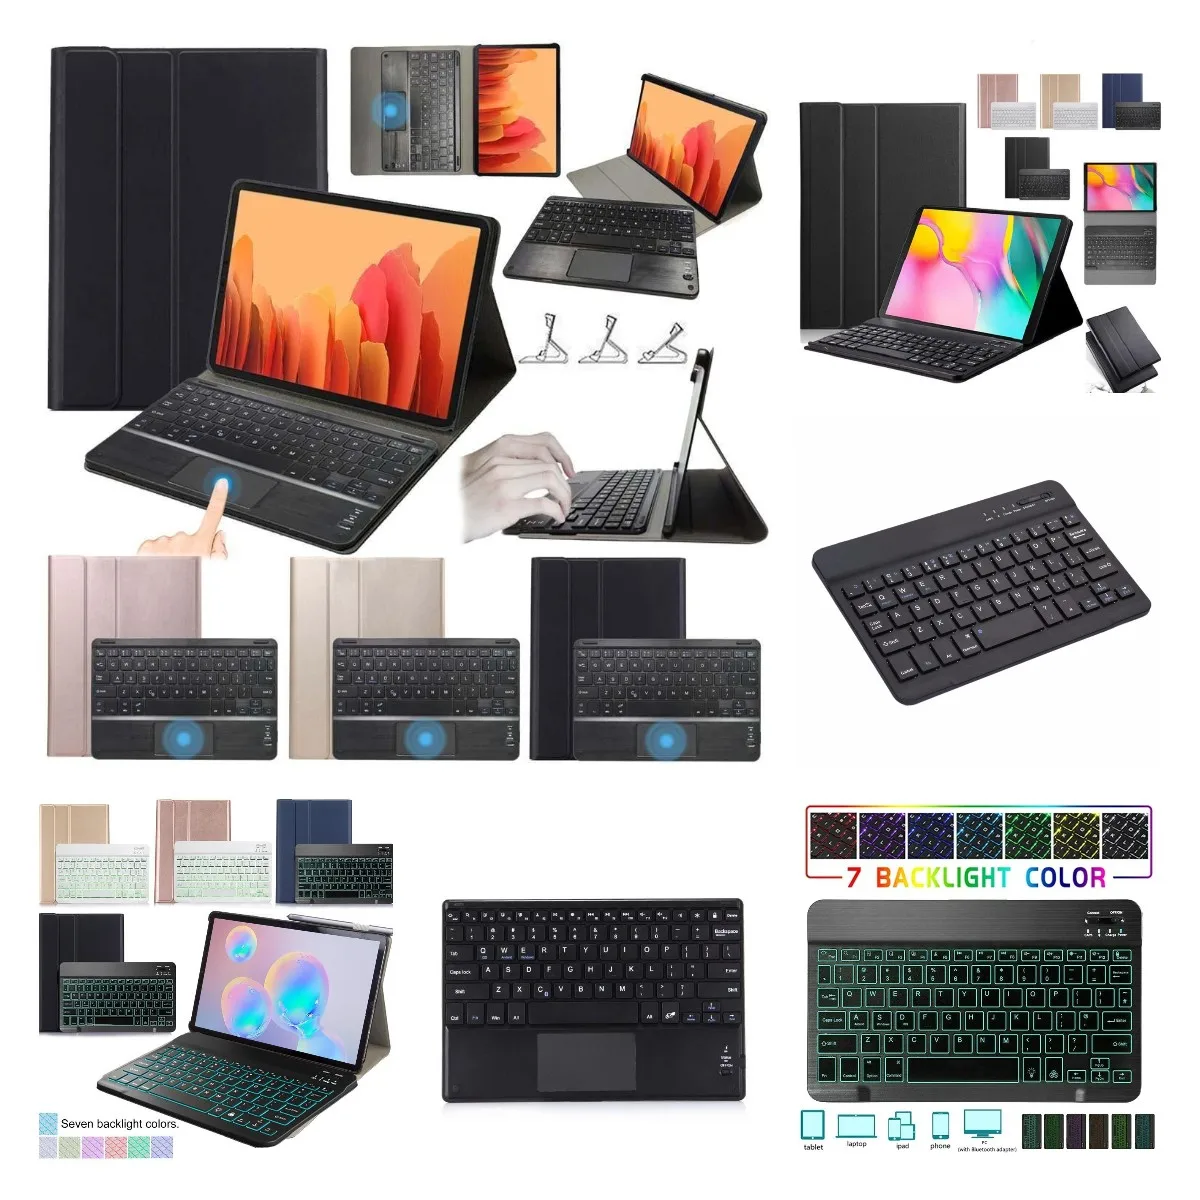 Slim Backlight Keyboard Case For HUAWEI MatePad Mate Pad 10.4 Inch BAH3-W09 BAH3-AL00 Tablet Bluetooth Touch Pad Keyboard Cover